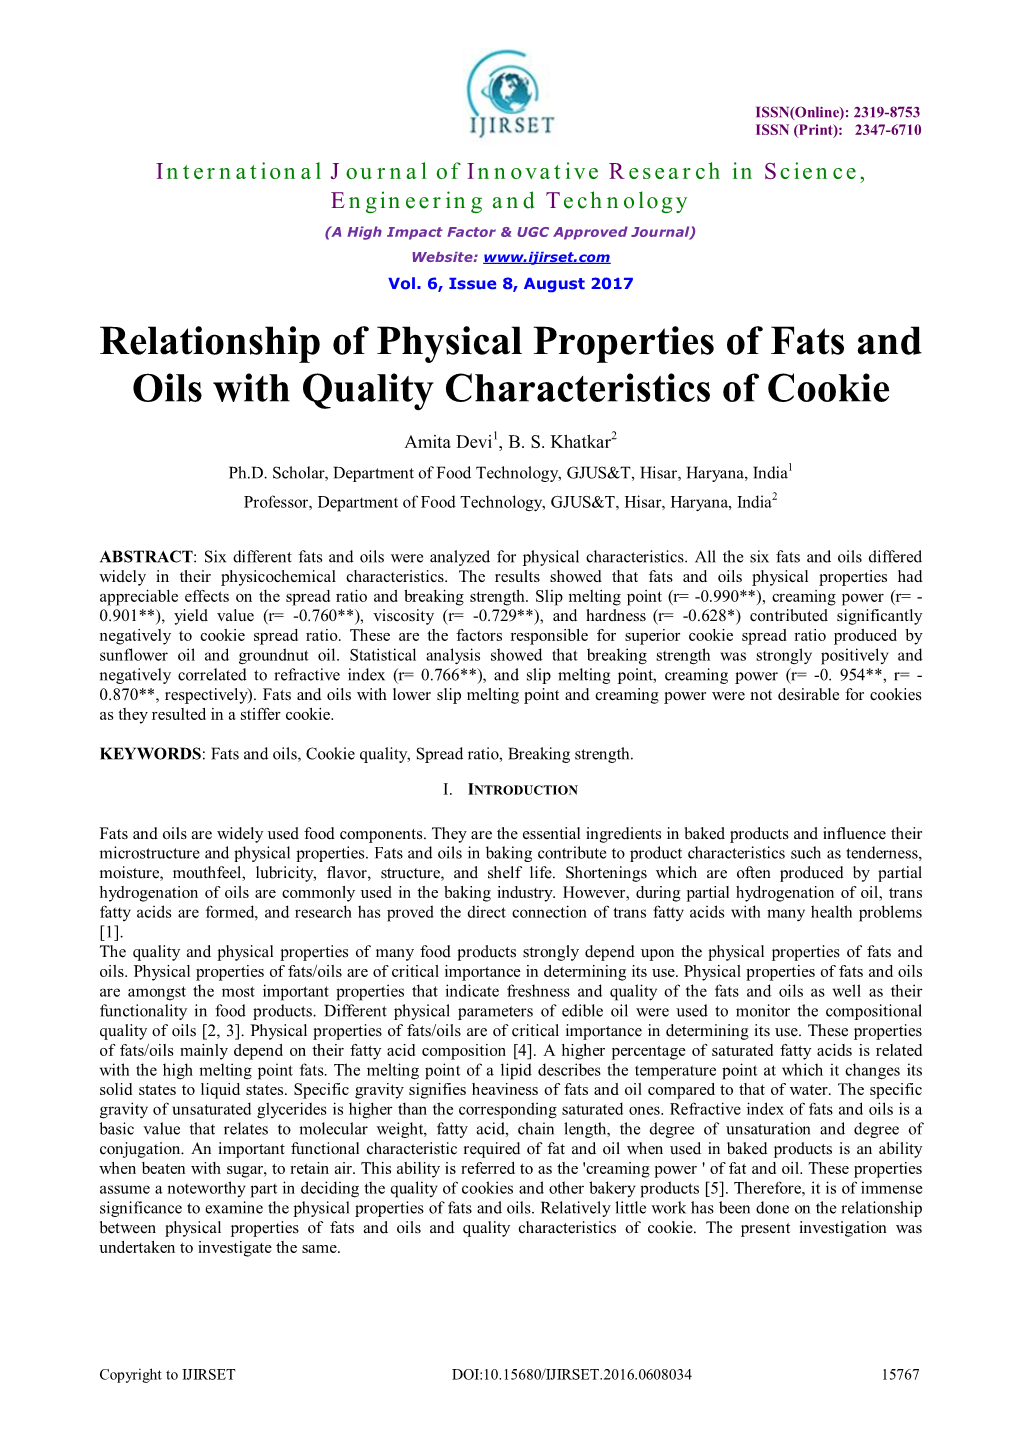 Relationship of Physical Properties of Fats and Oils with Quality Characteristics of Cookie